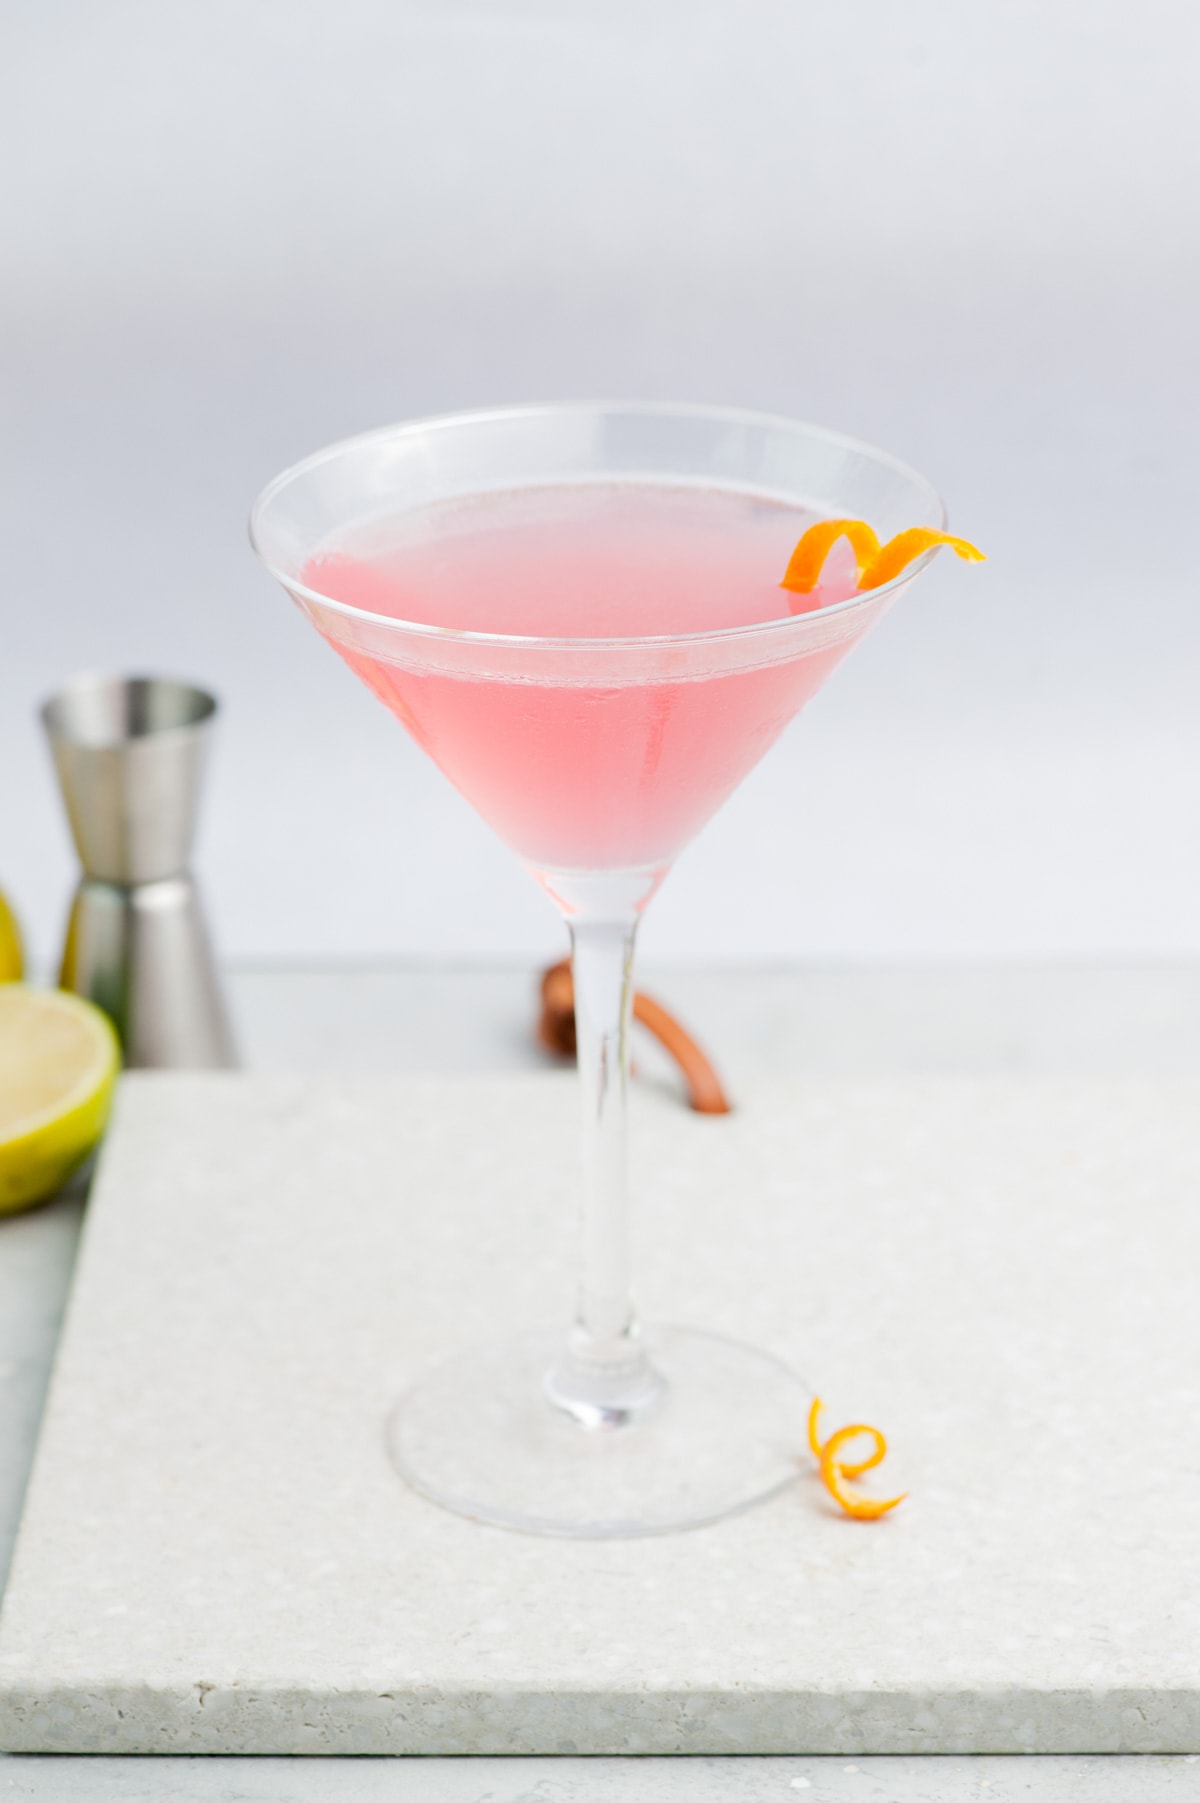 Cosmopolitan cocktail in a martini glass, garnished with an orange twist.